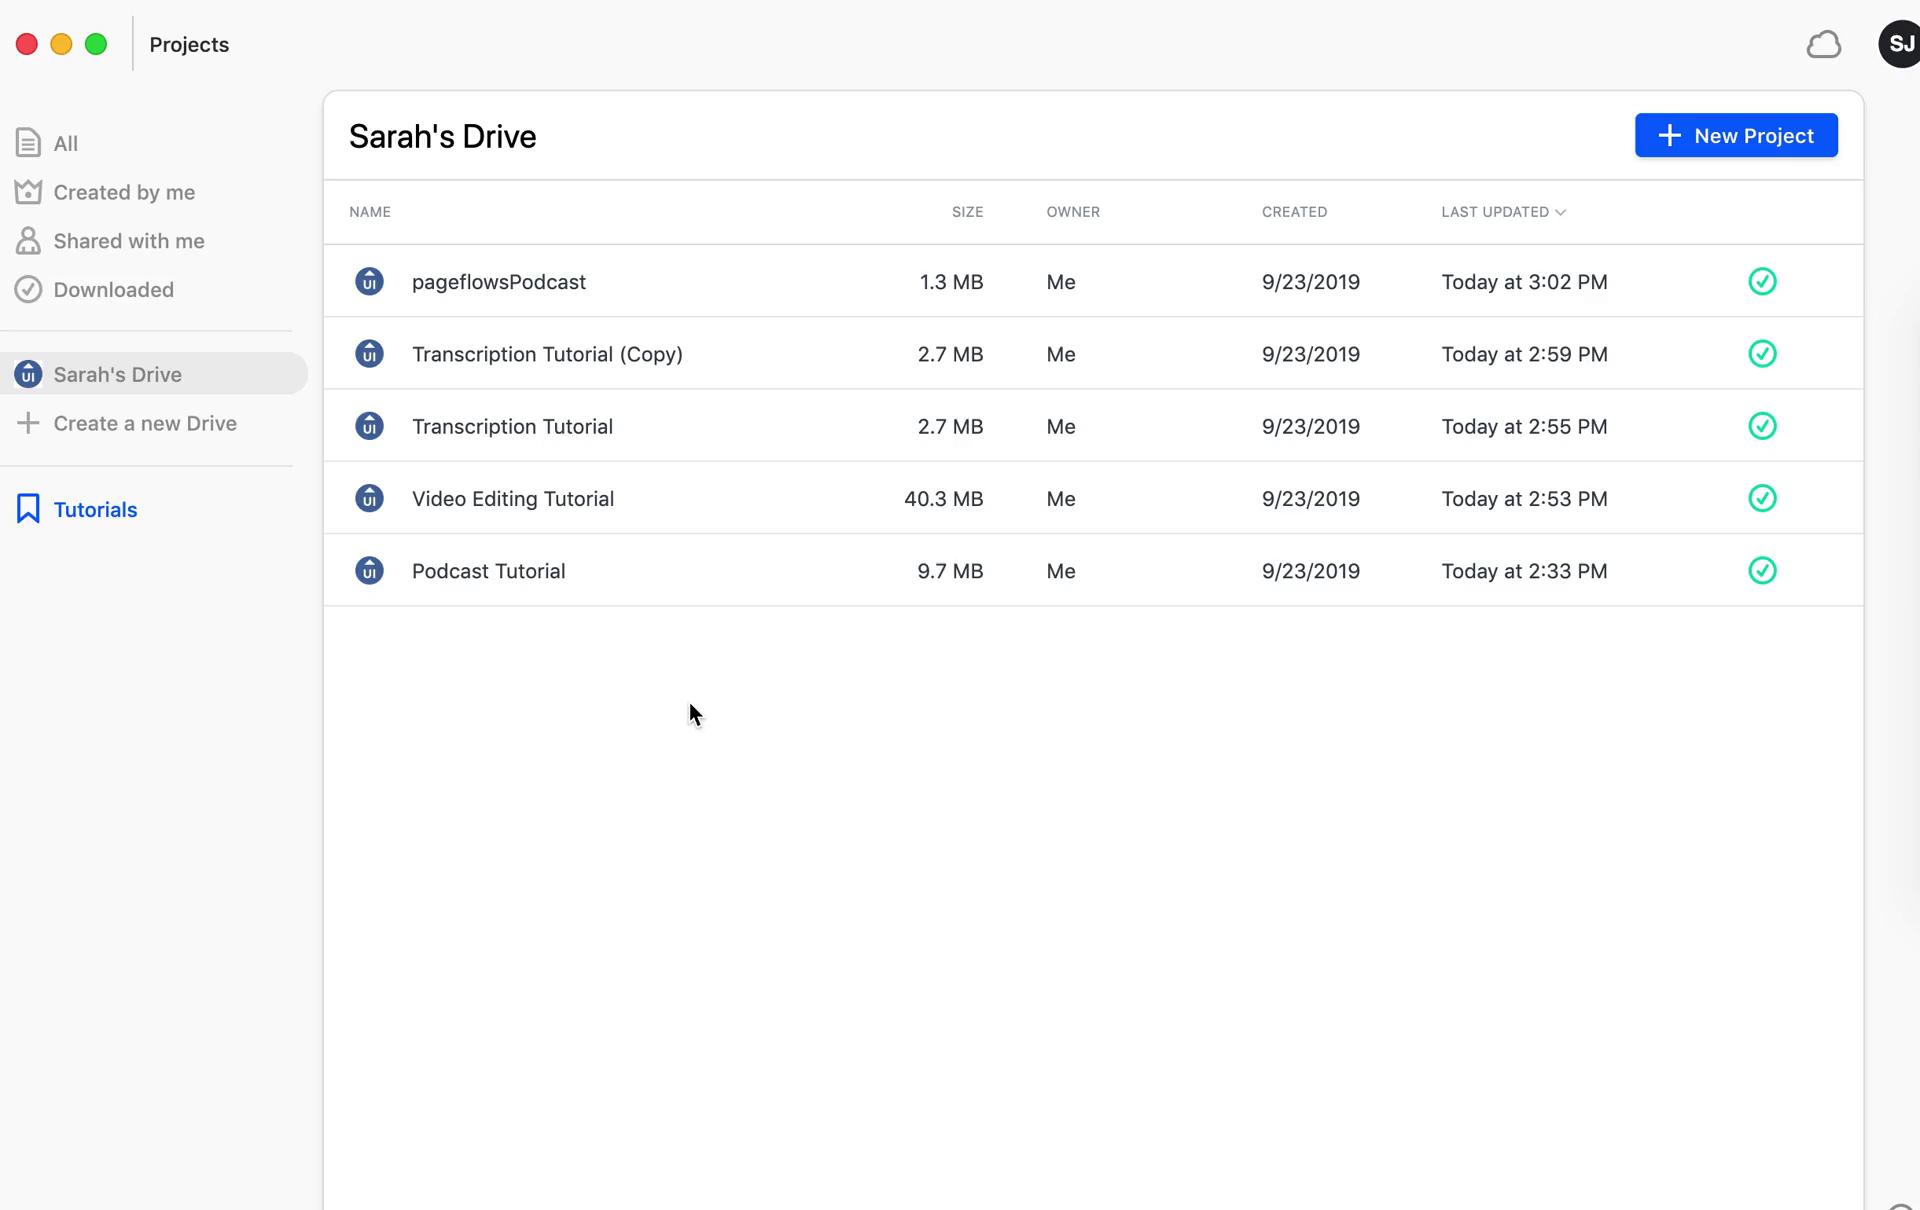 Screenshot of Projects on Version history on Descript user flow